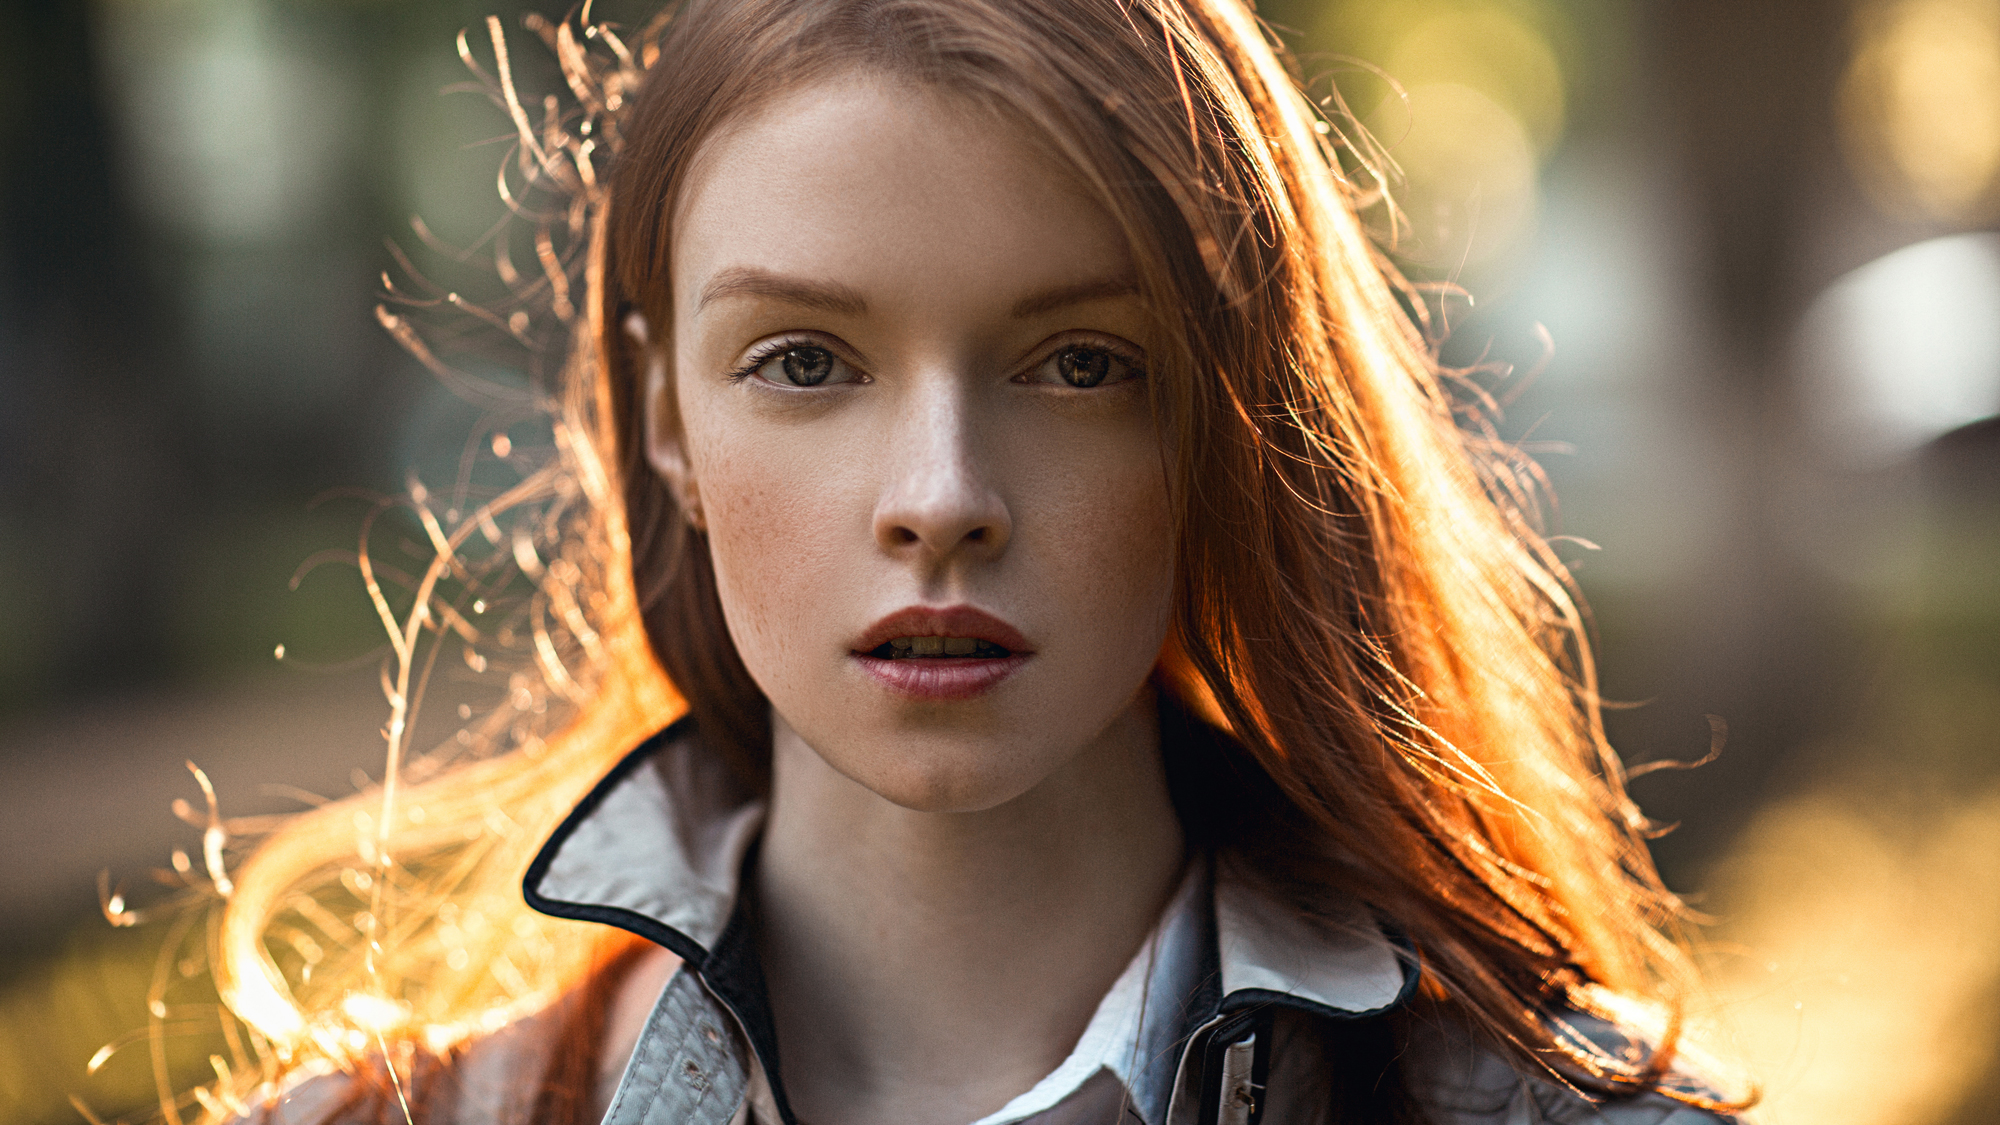 Women Model Redhead Looking At Viewer Portrait Outdoors Coats Backlighting Sunset Depth Of Field Fac 2000x1125